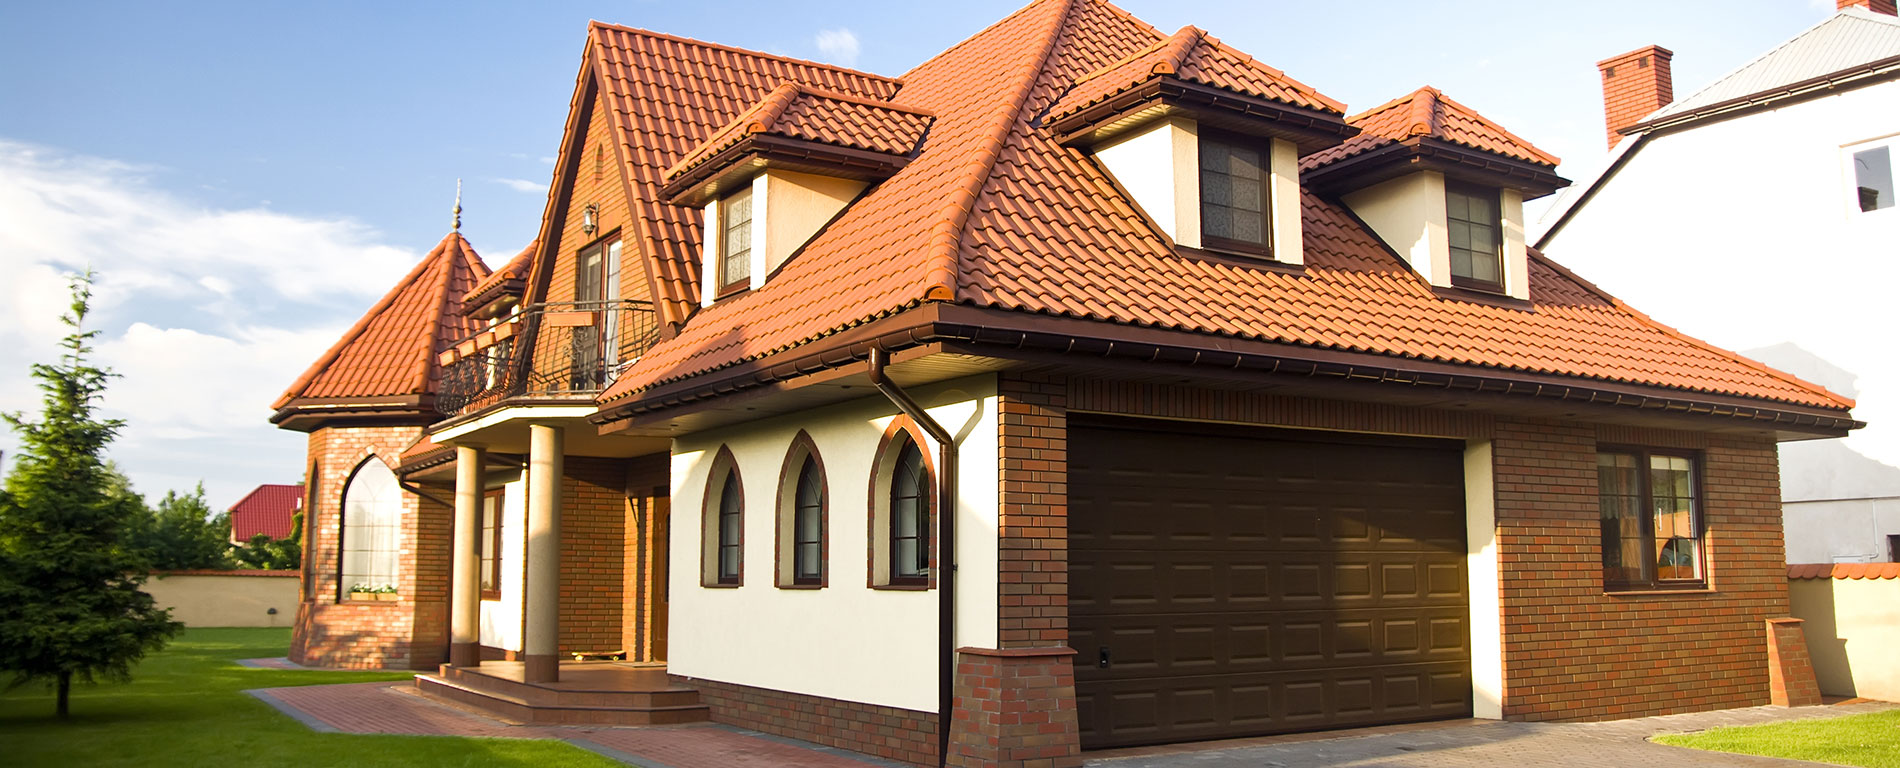 Fast Repair Services For New Braunfels Garage Doors